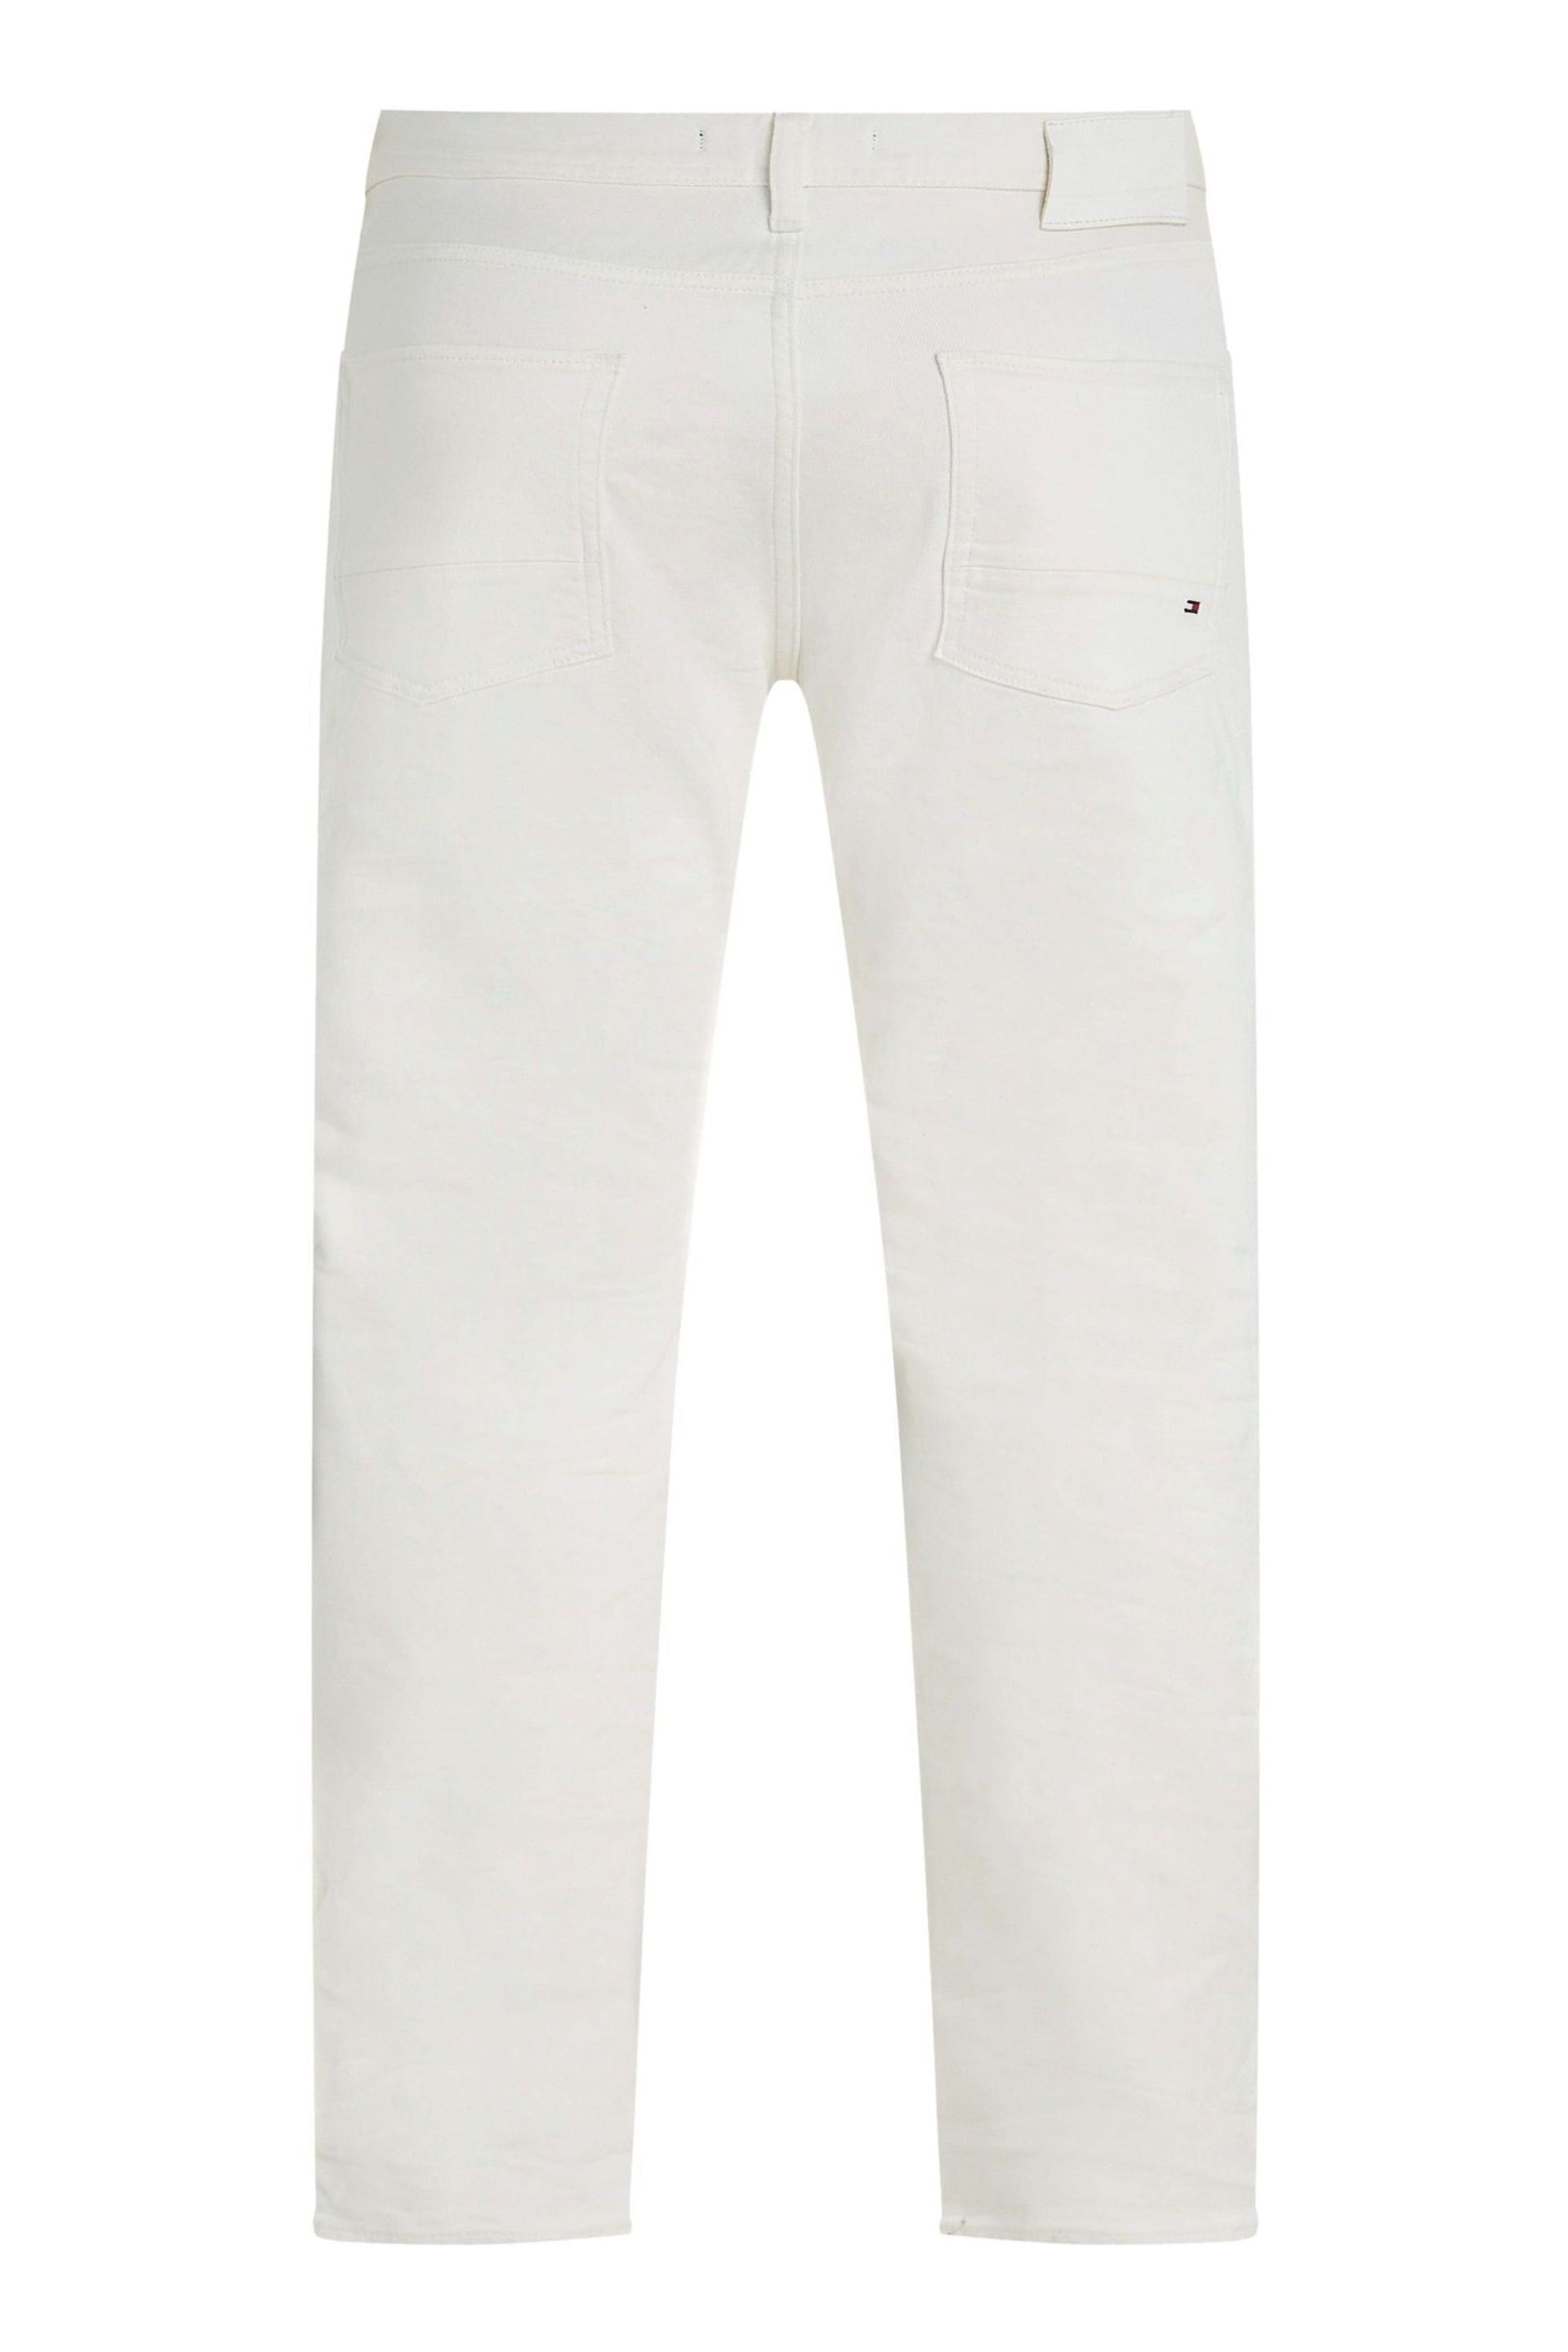 Tommy Hilfiger Straight Denton Gale White Jeans - Image 5 of 5